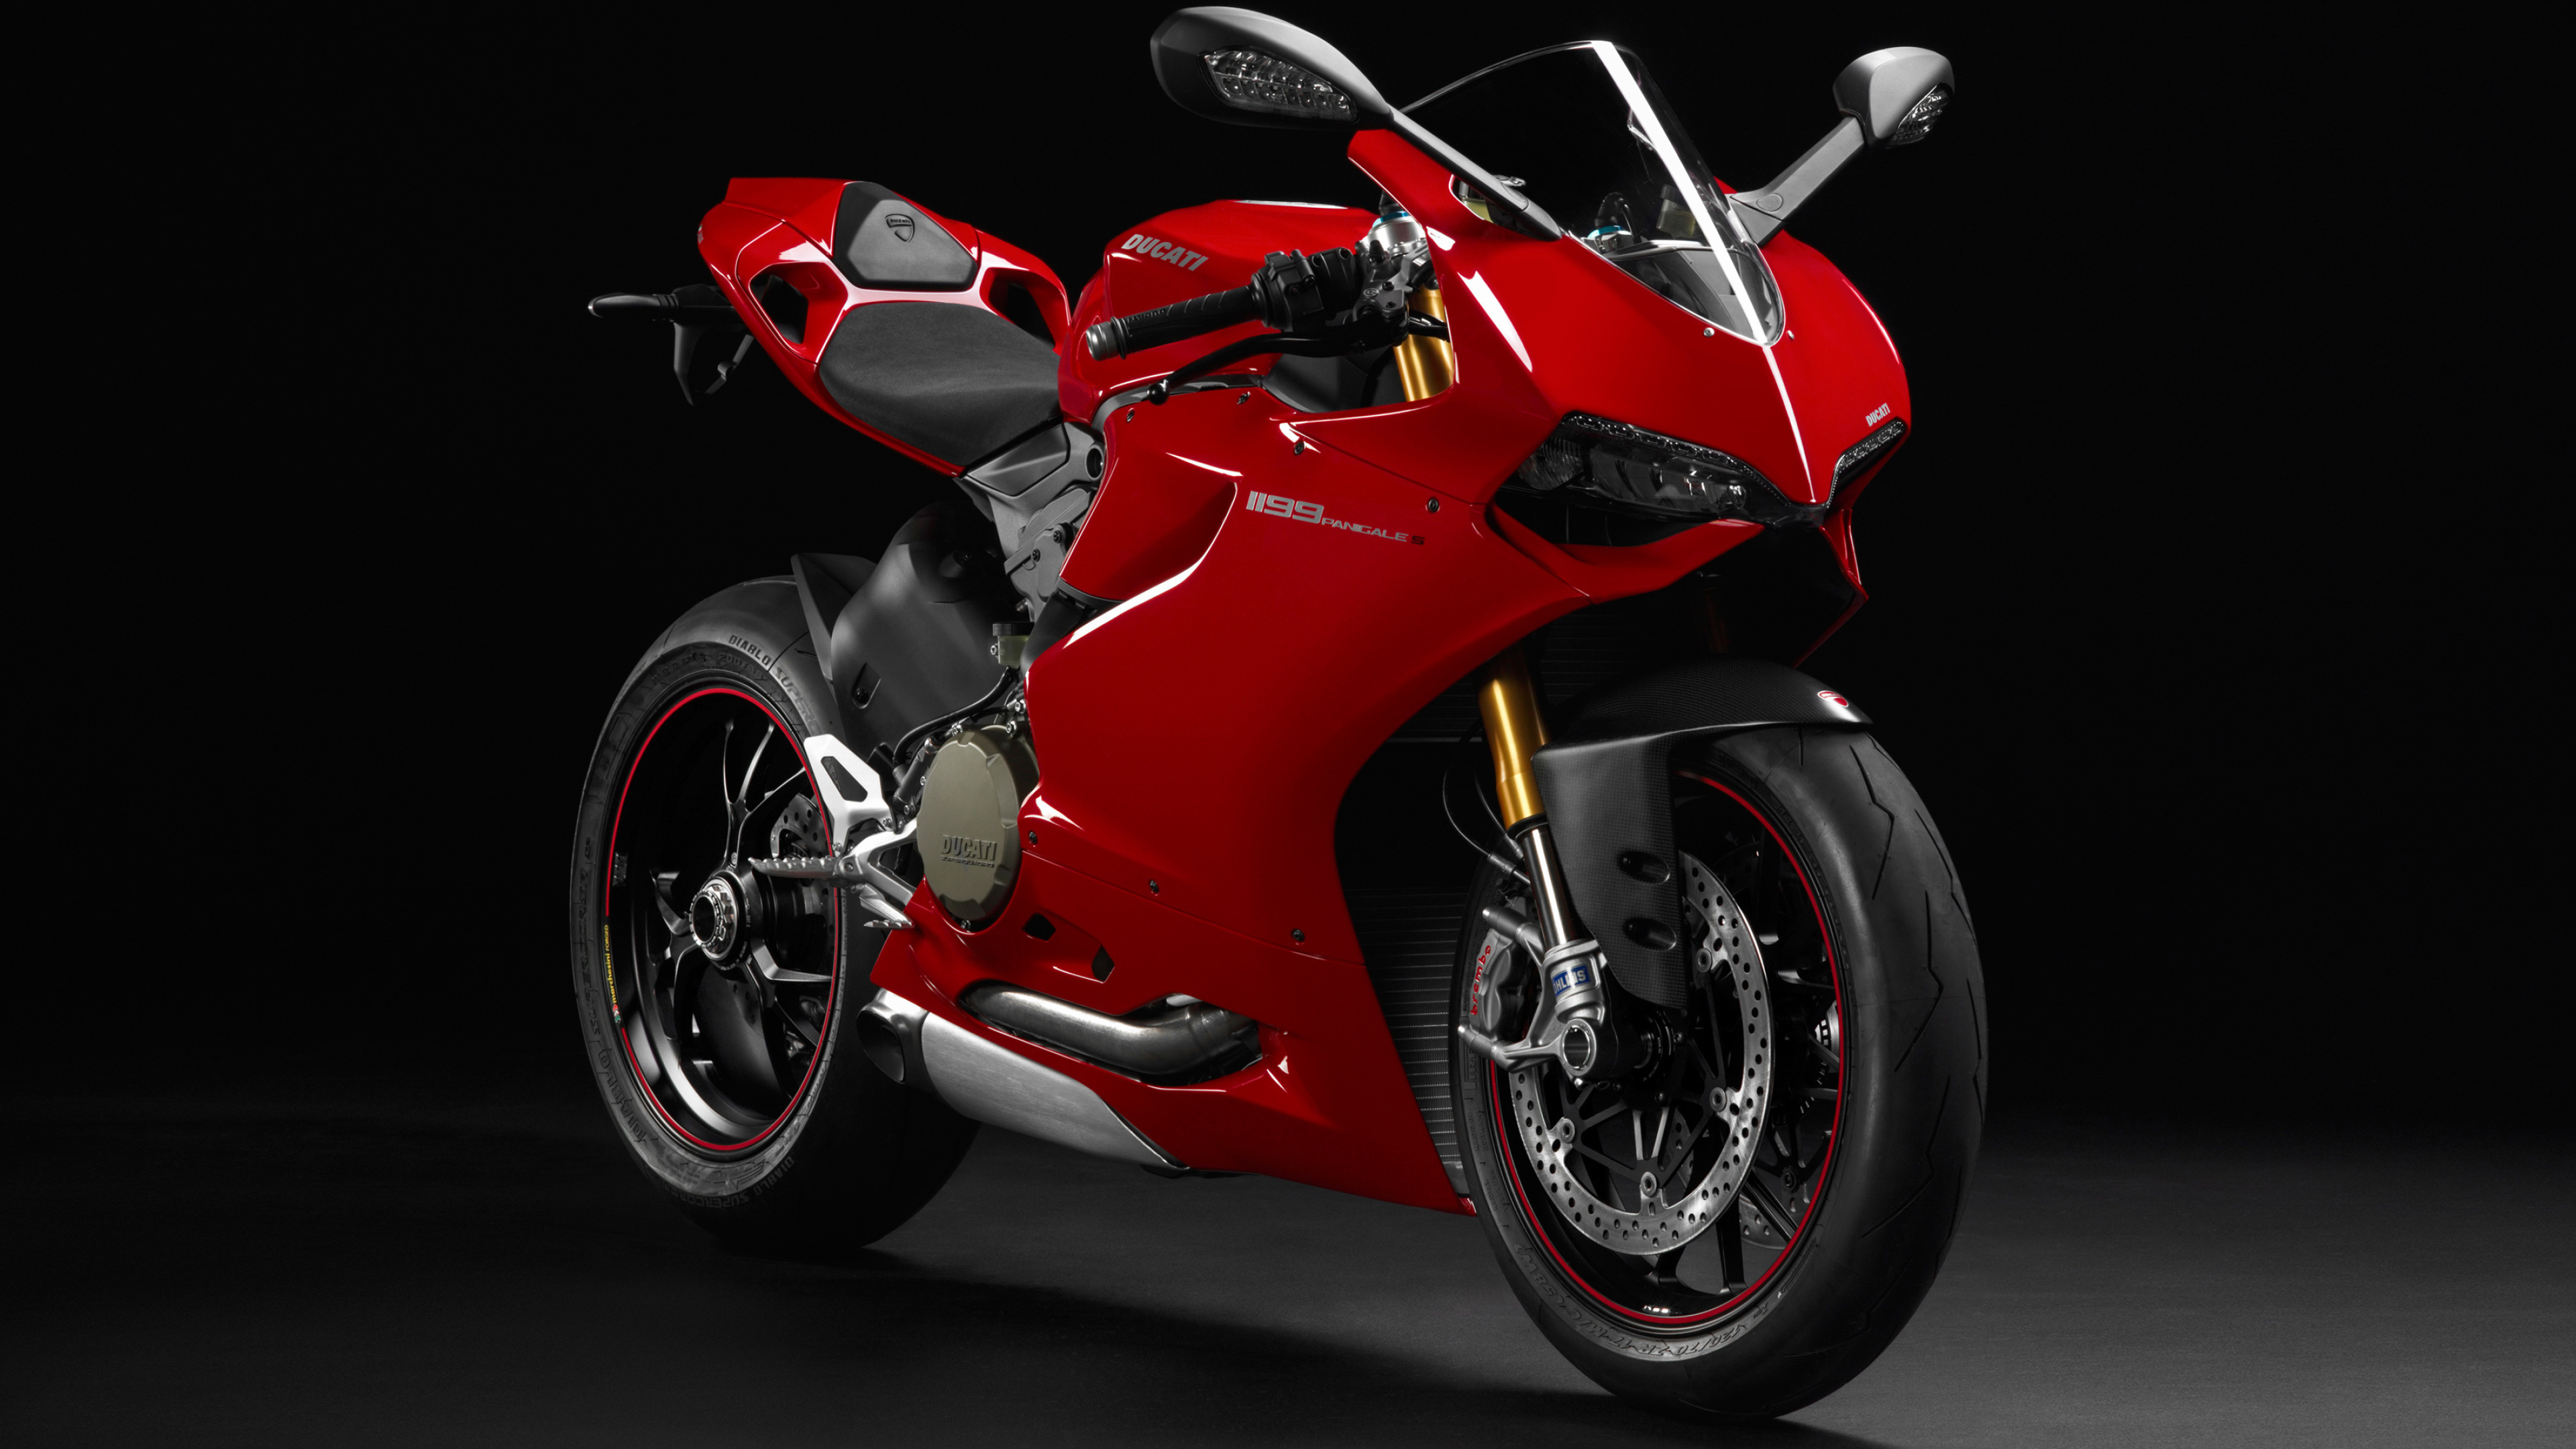 Superbike: The Ducati 1199 Panigale sports motorcycle that was introduced at the 2011 Milan Motorcycle Show. 3840x2160 4K Background.